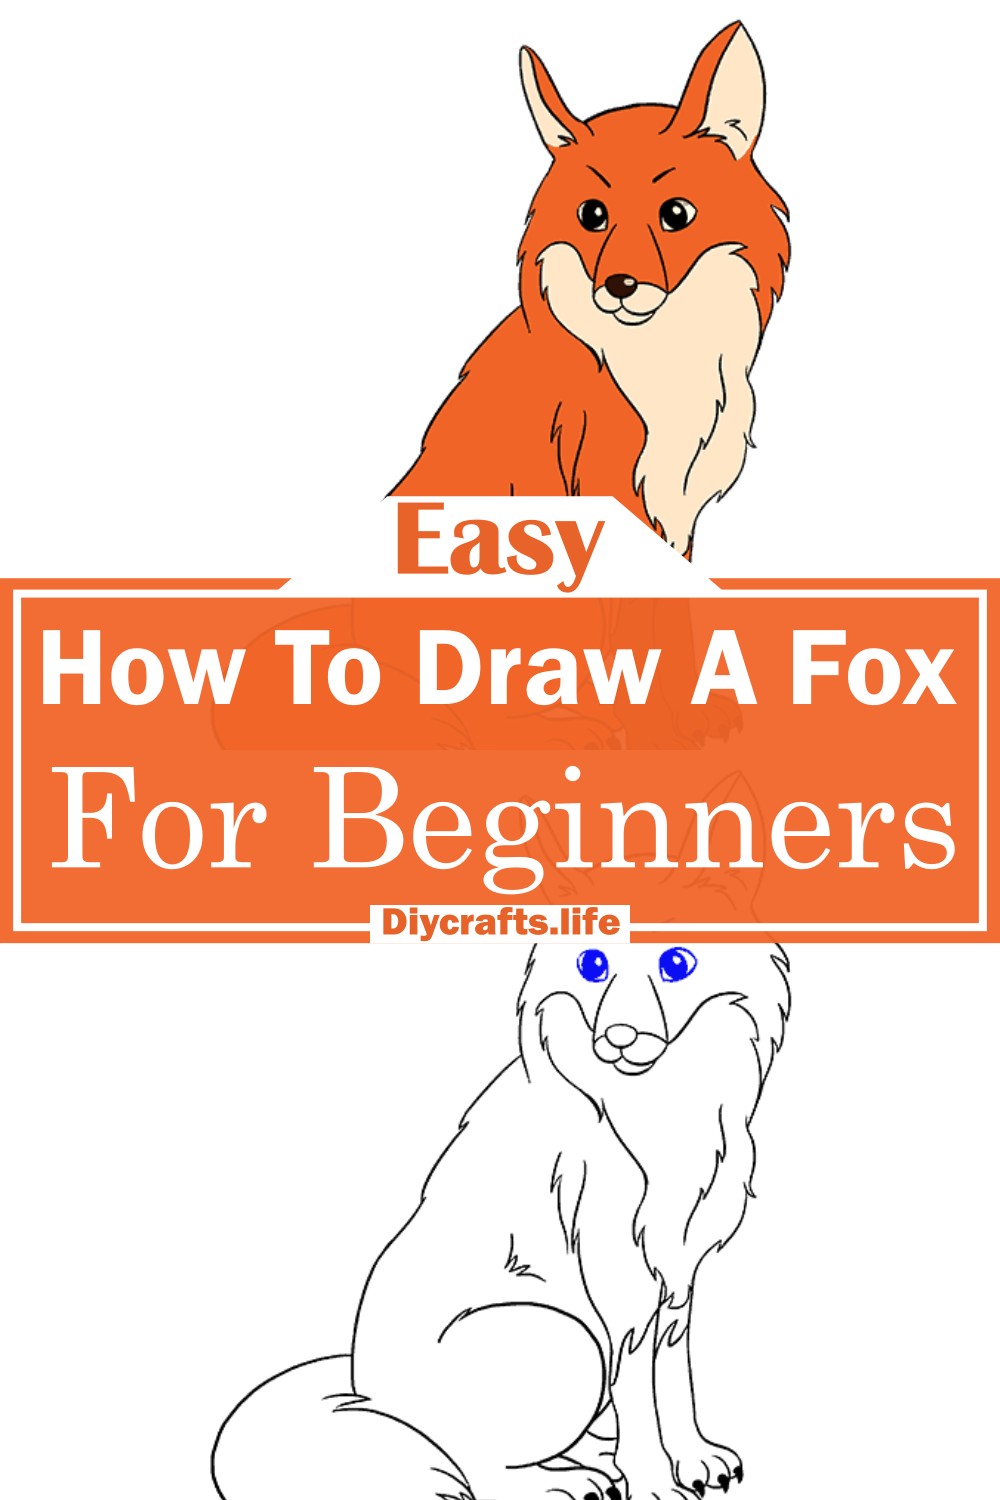 How To Draw A Fox For Beginners